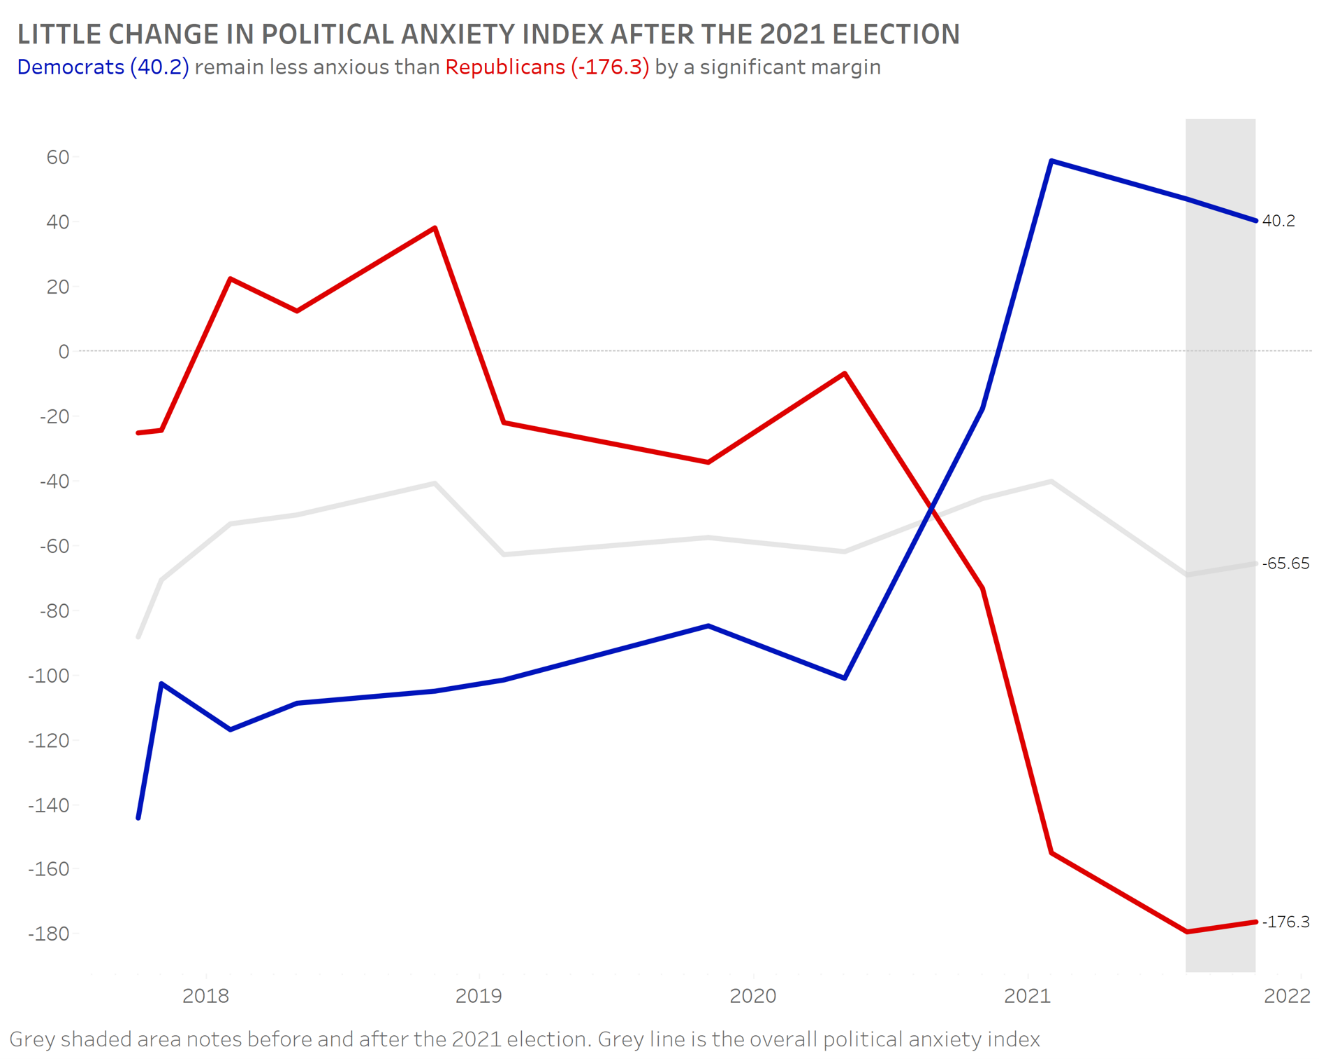 Little change in political anxiety index after the 2021 election